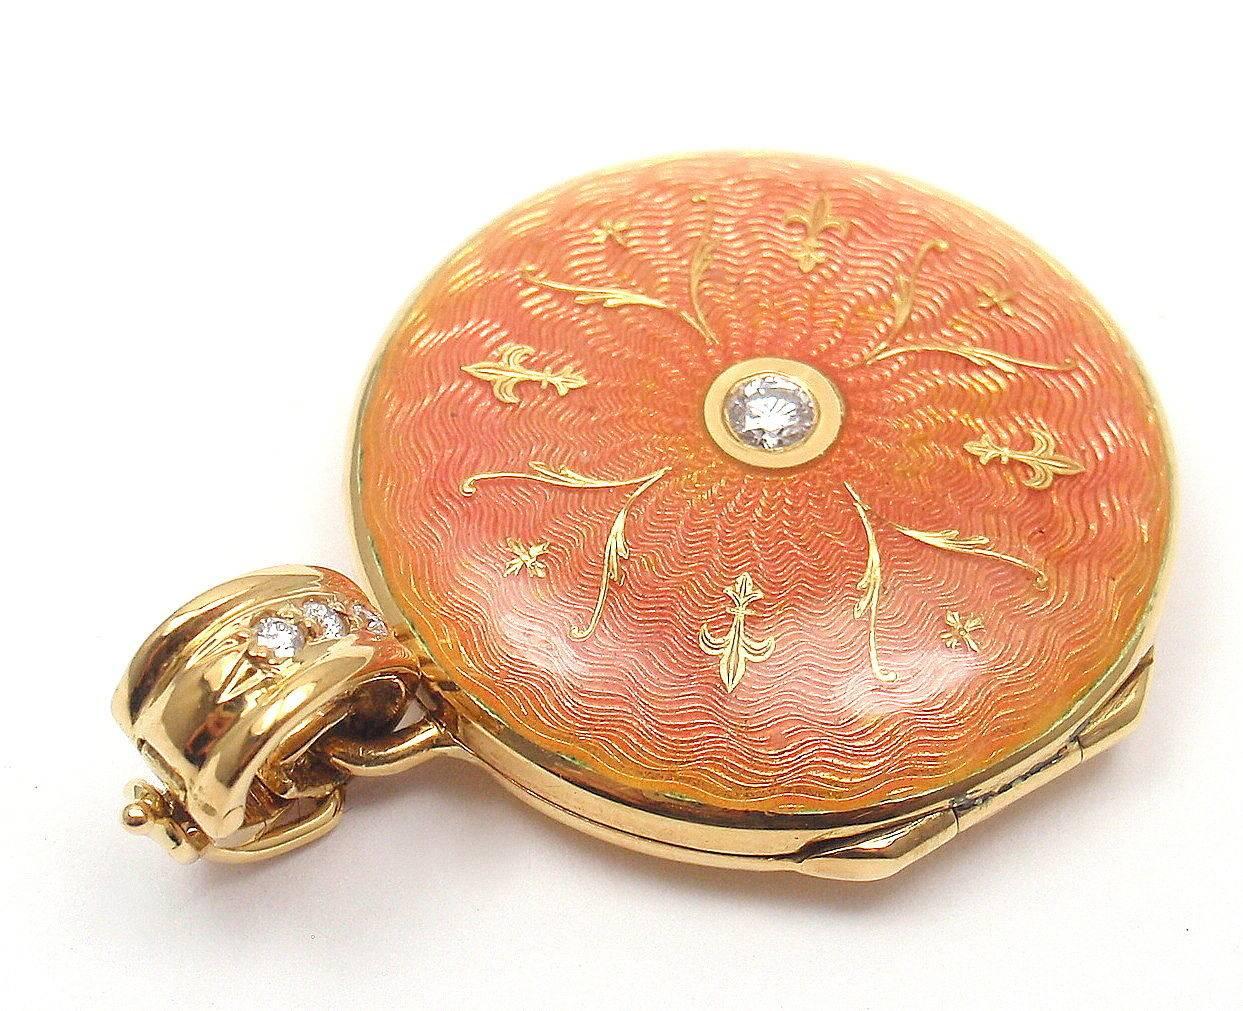 8k Yellow Gold Diamond Orange Pink Enamel Pendant by Modern Faberge.
With three diamonds in bale and one center diamond total 4 diamonds.
Limited edition locket, one of 200 produced. 
Beautiful pink to orange wave gradients in enamel with small